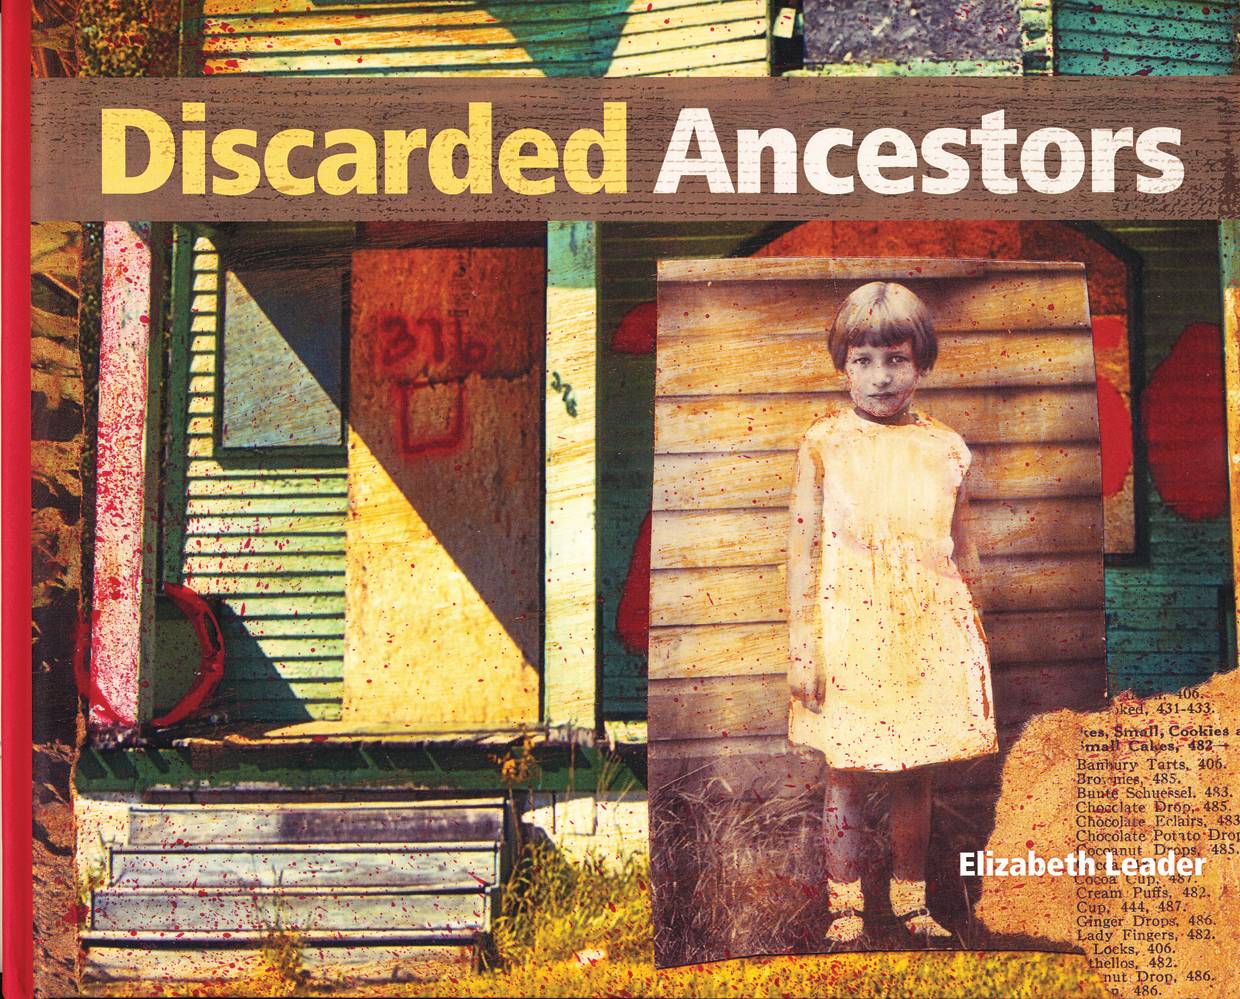 'DISCARDED ANCESTORS'